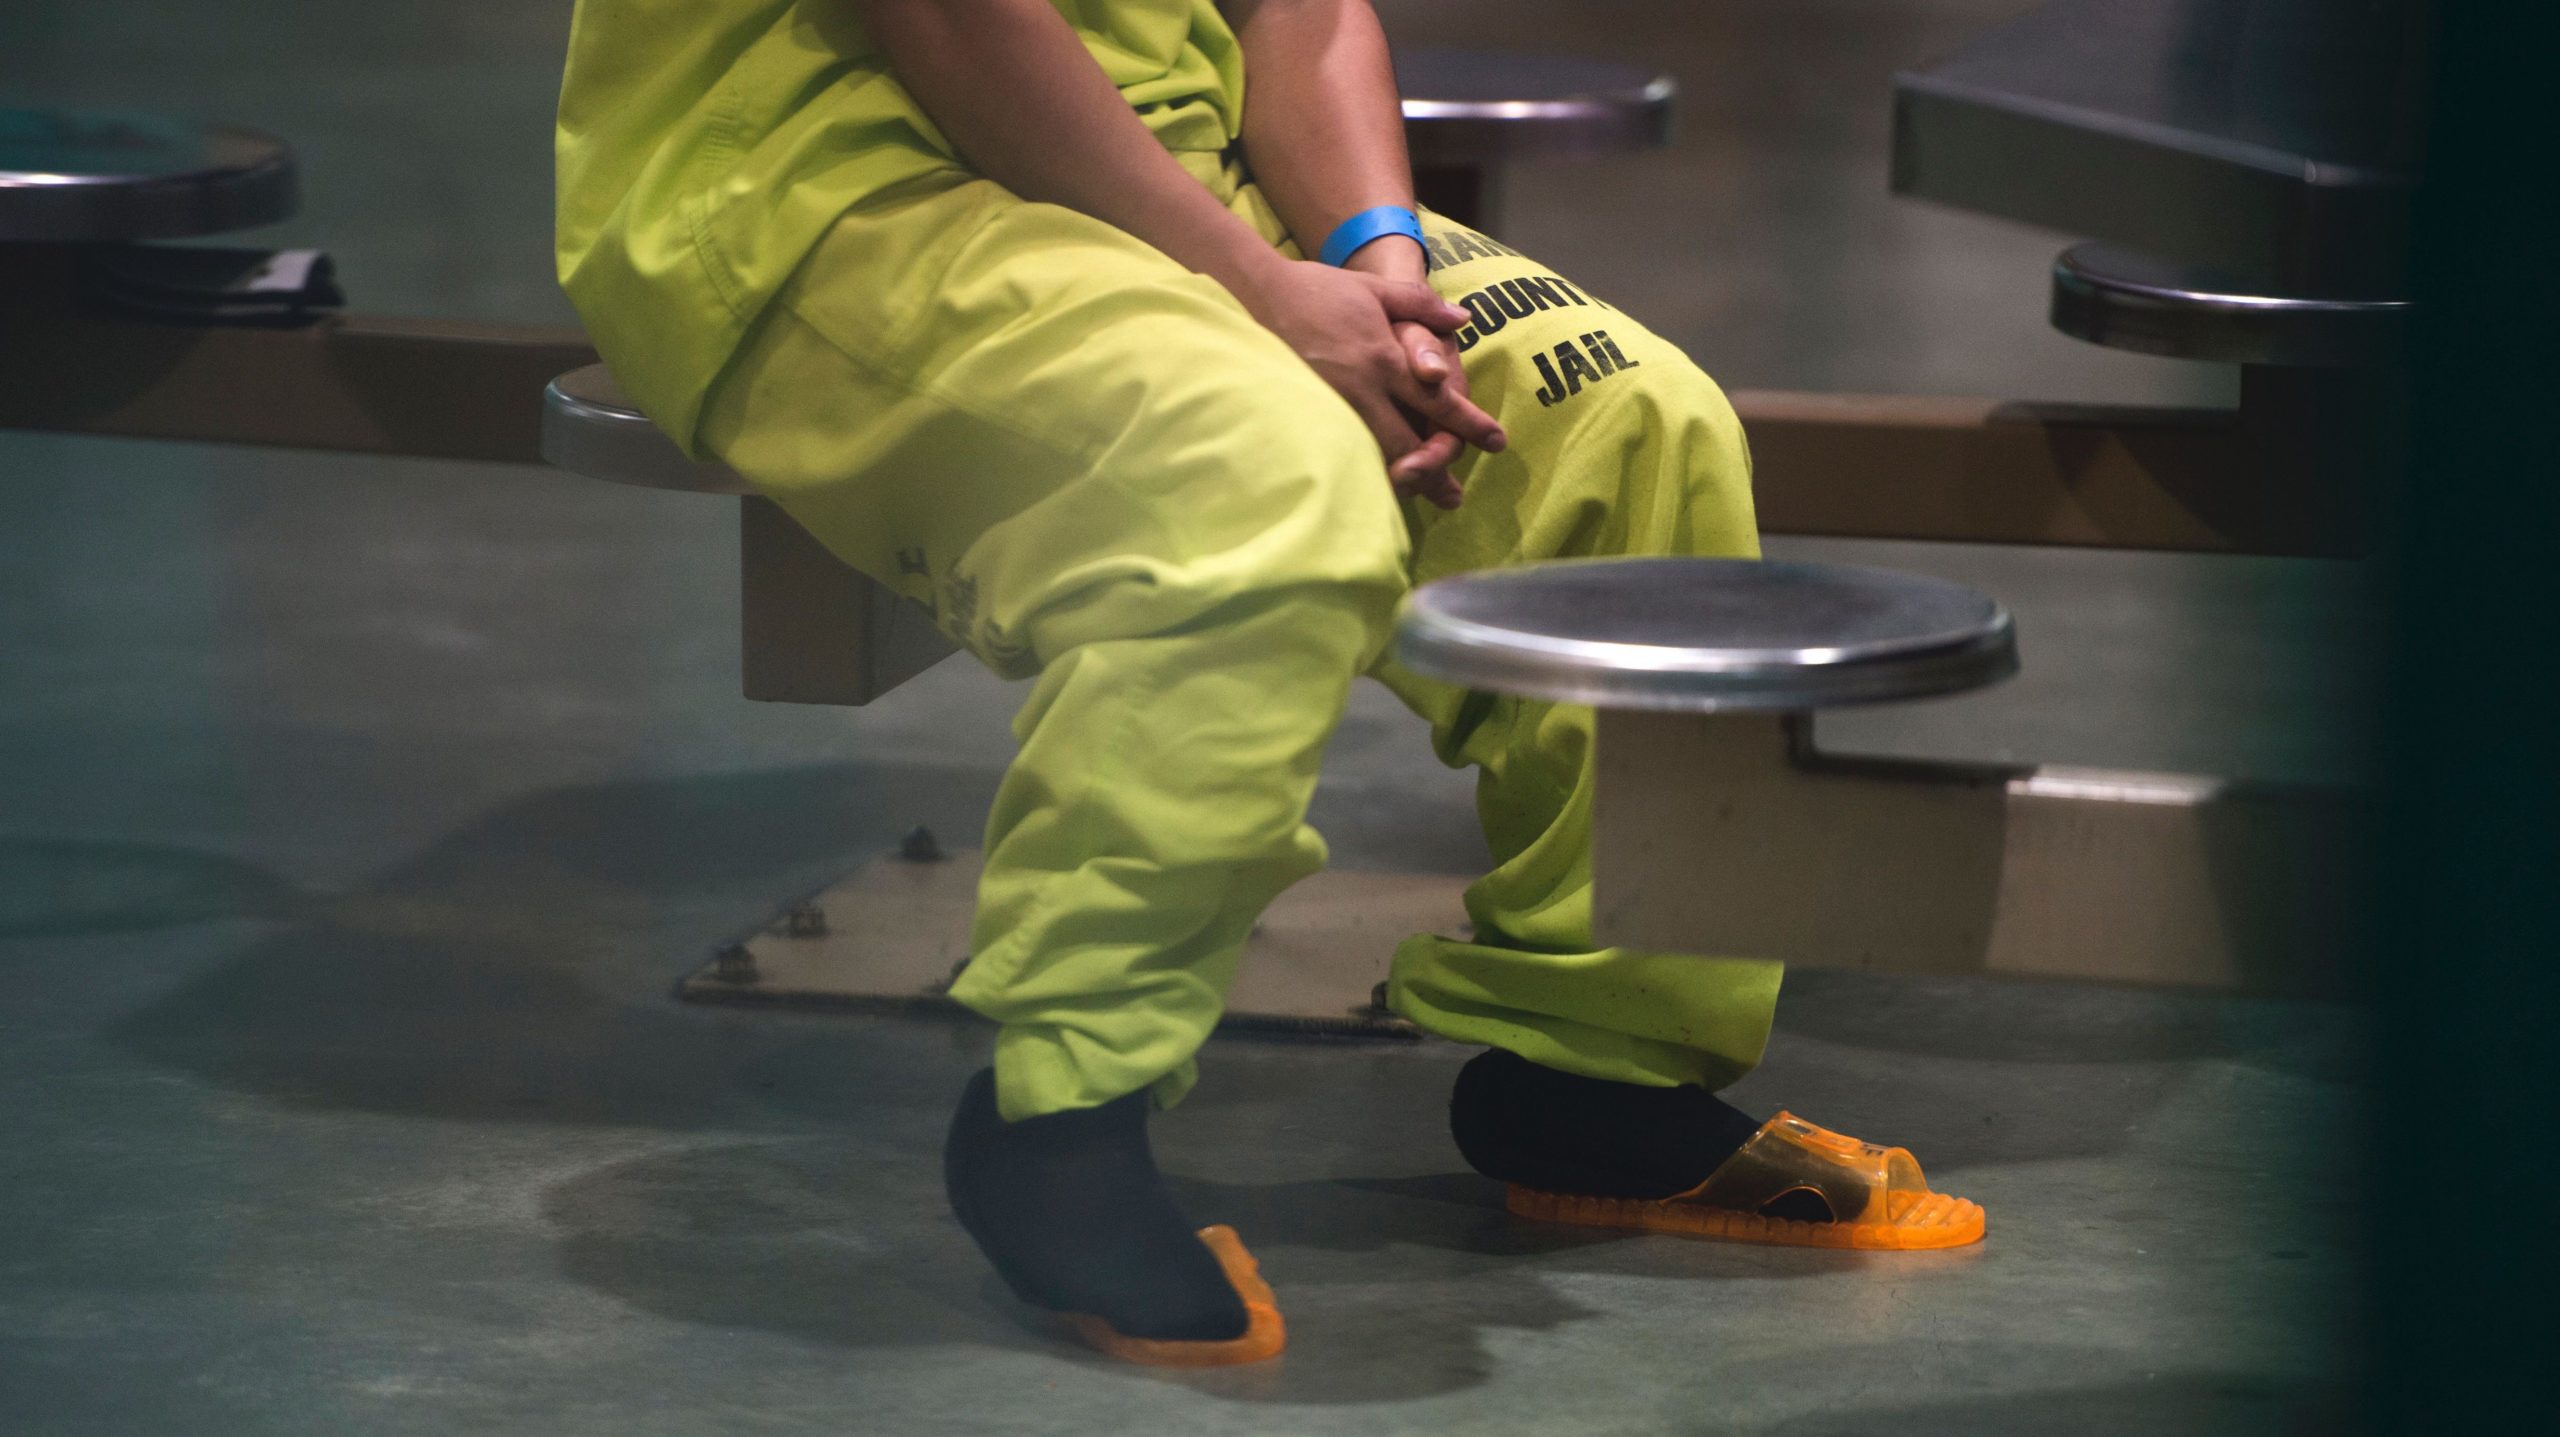 The Coronavirus Has Reached Jails and Prisons — But You Can Still Help